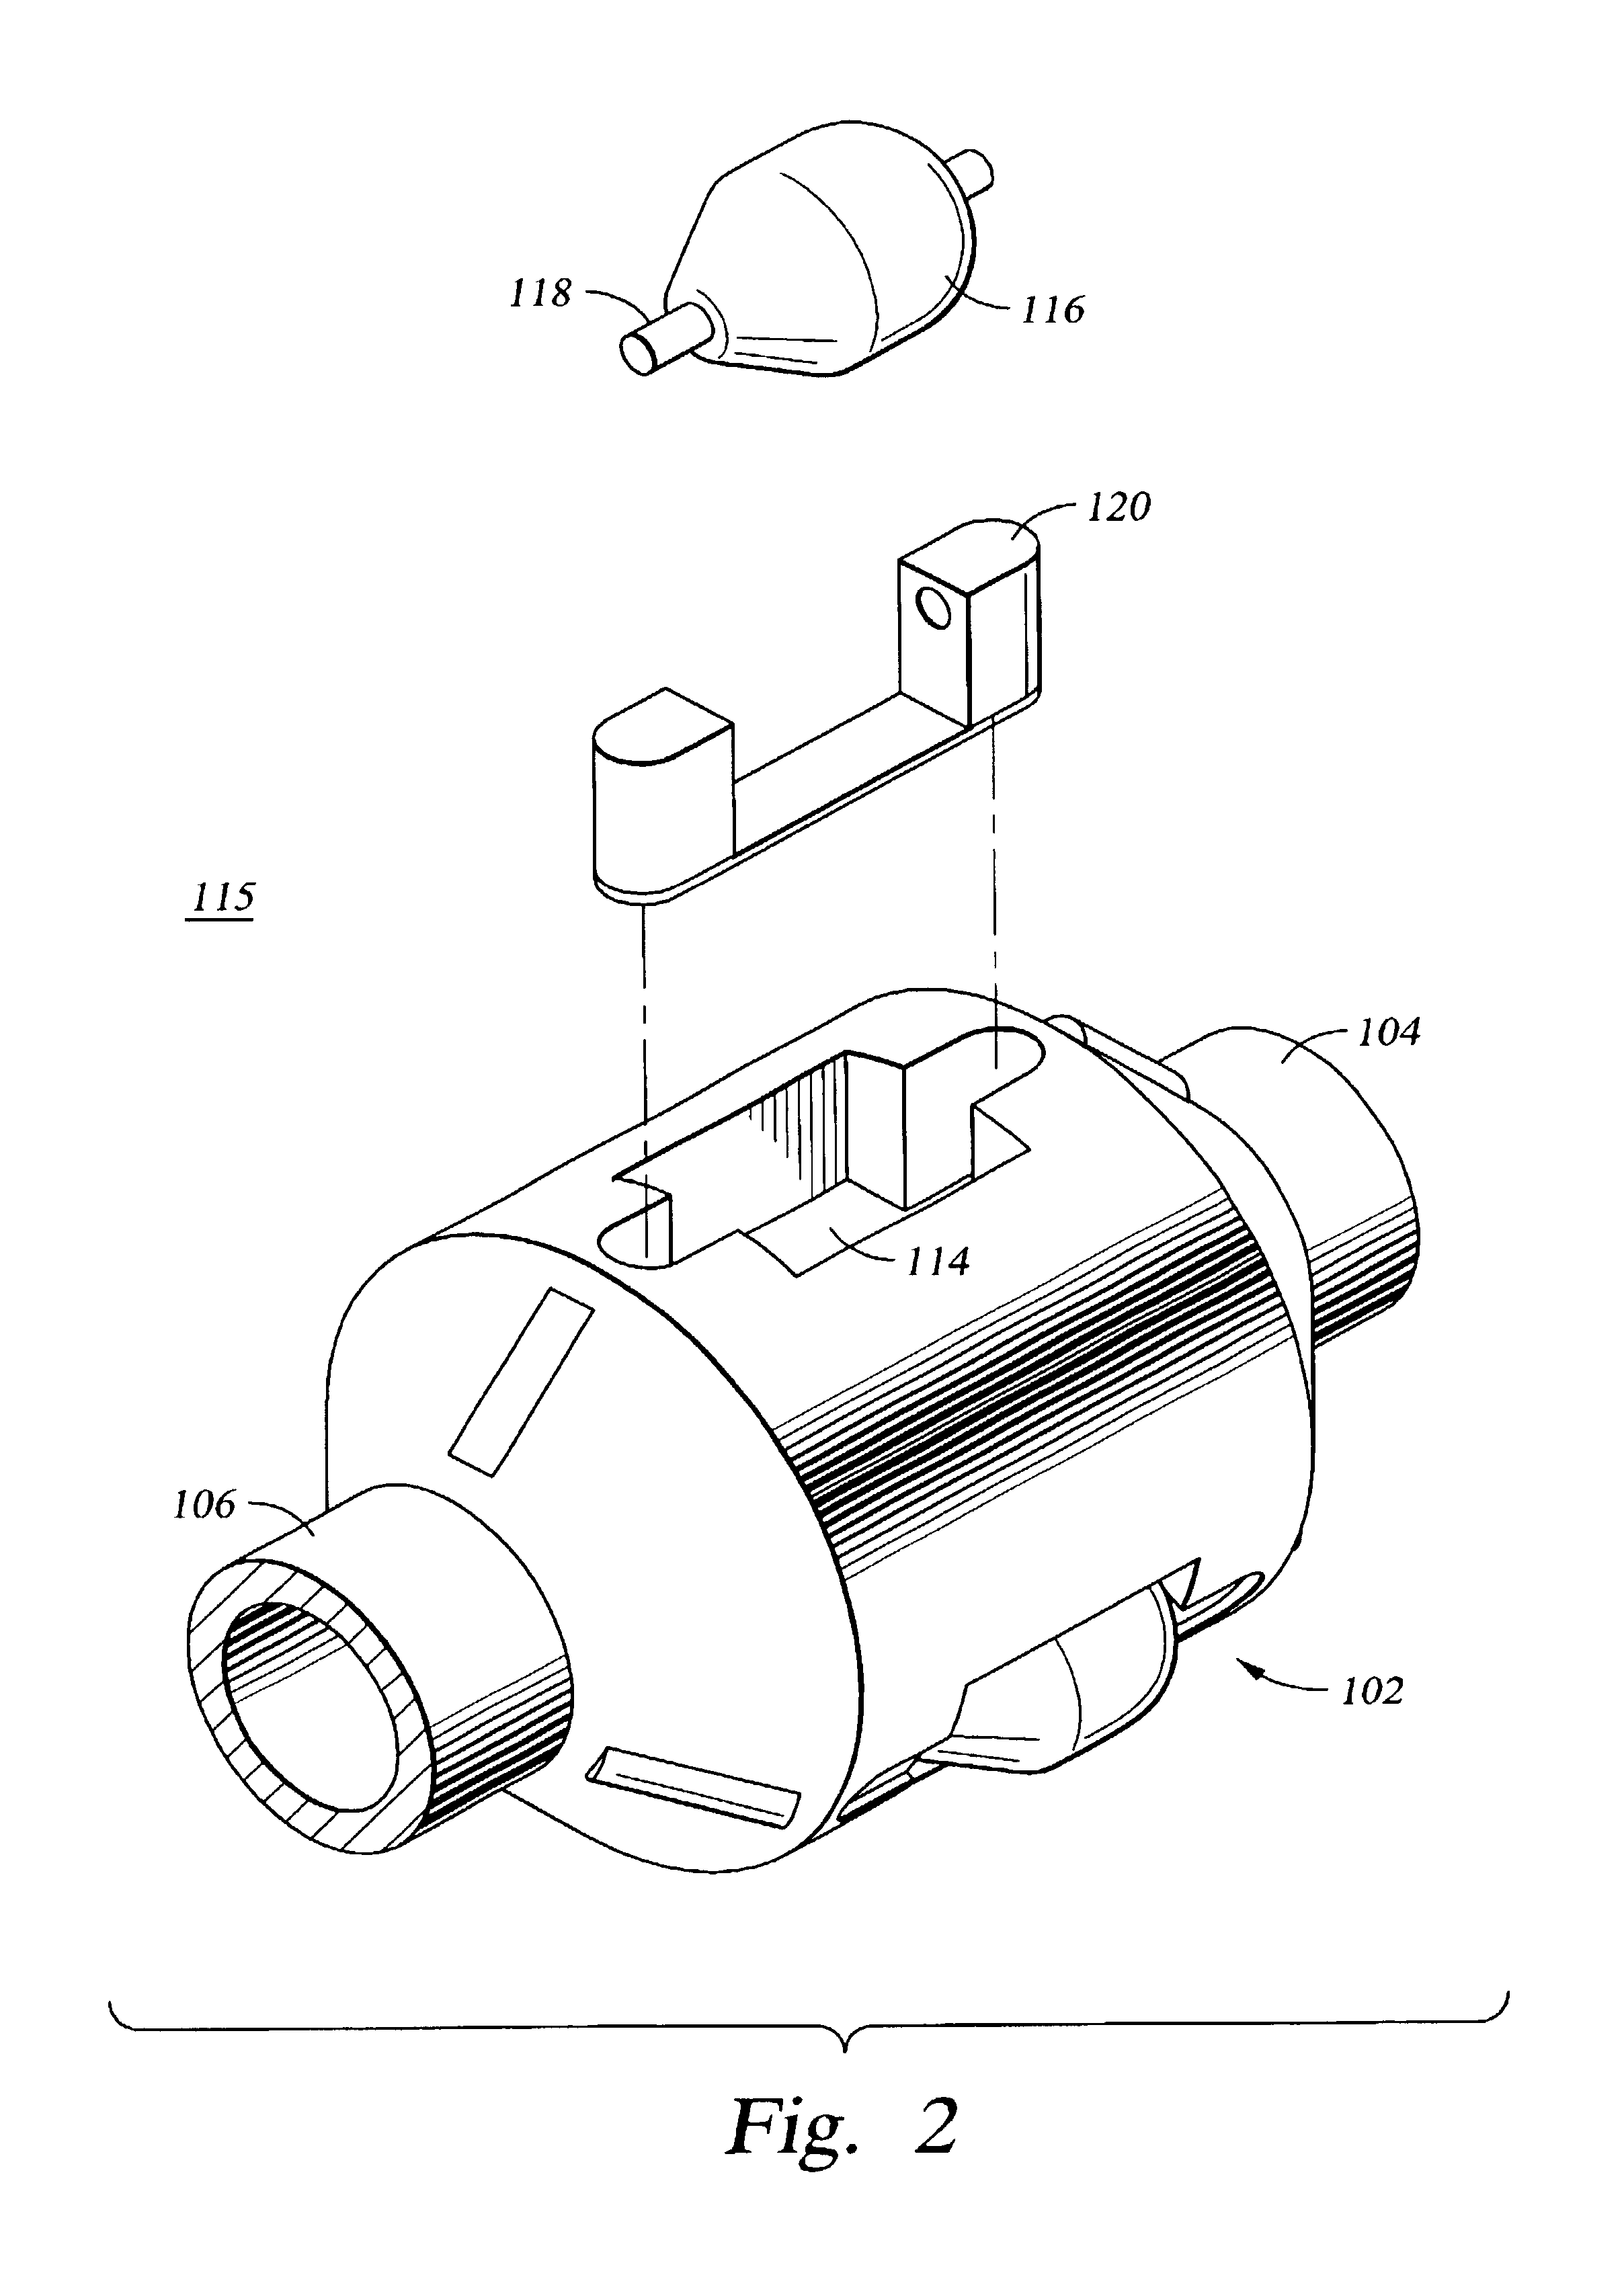 Expandable connection for use with a swelling elastomer